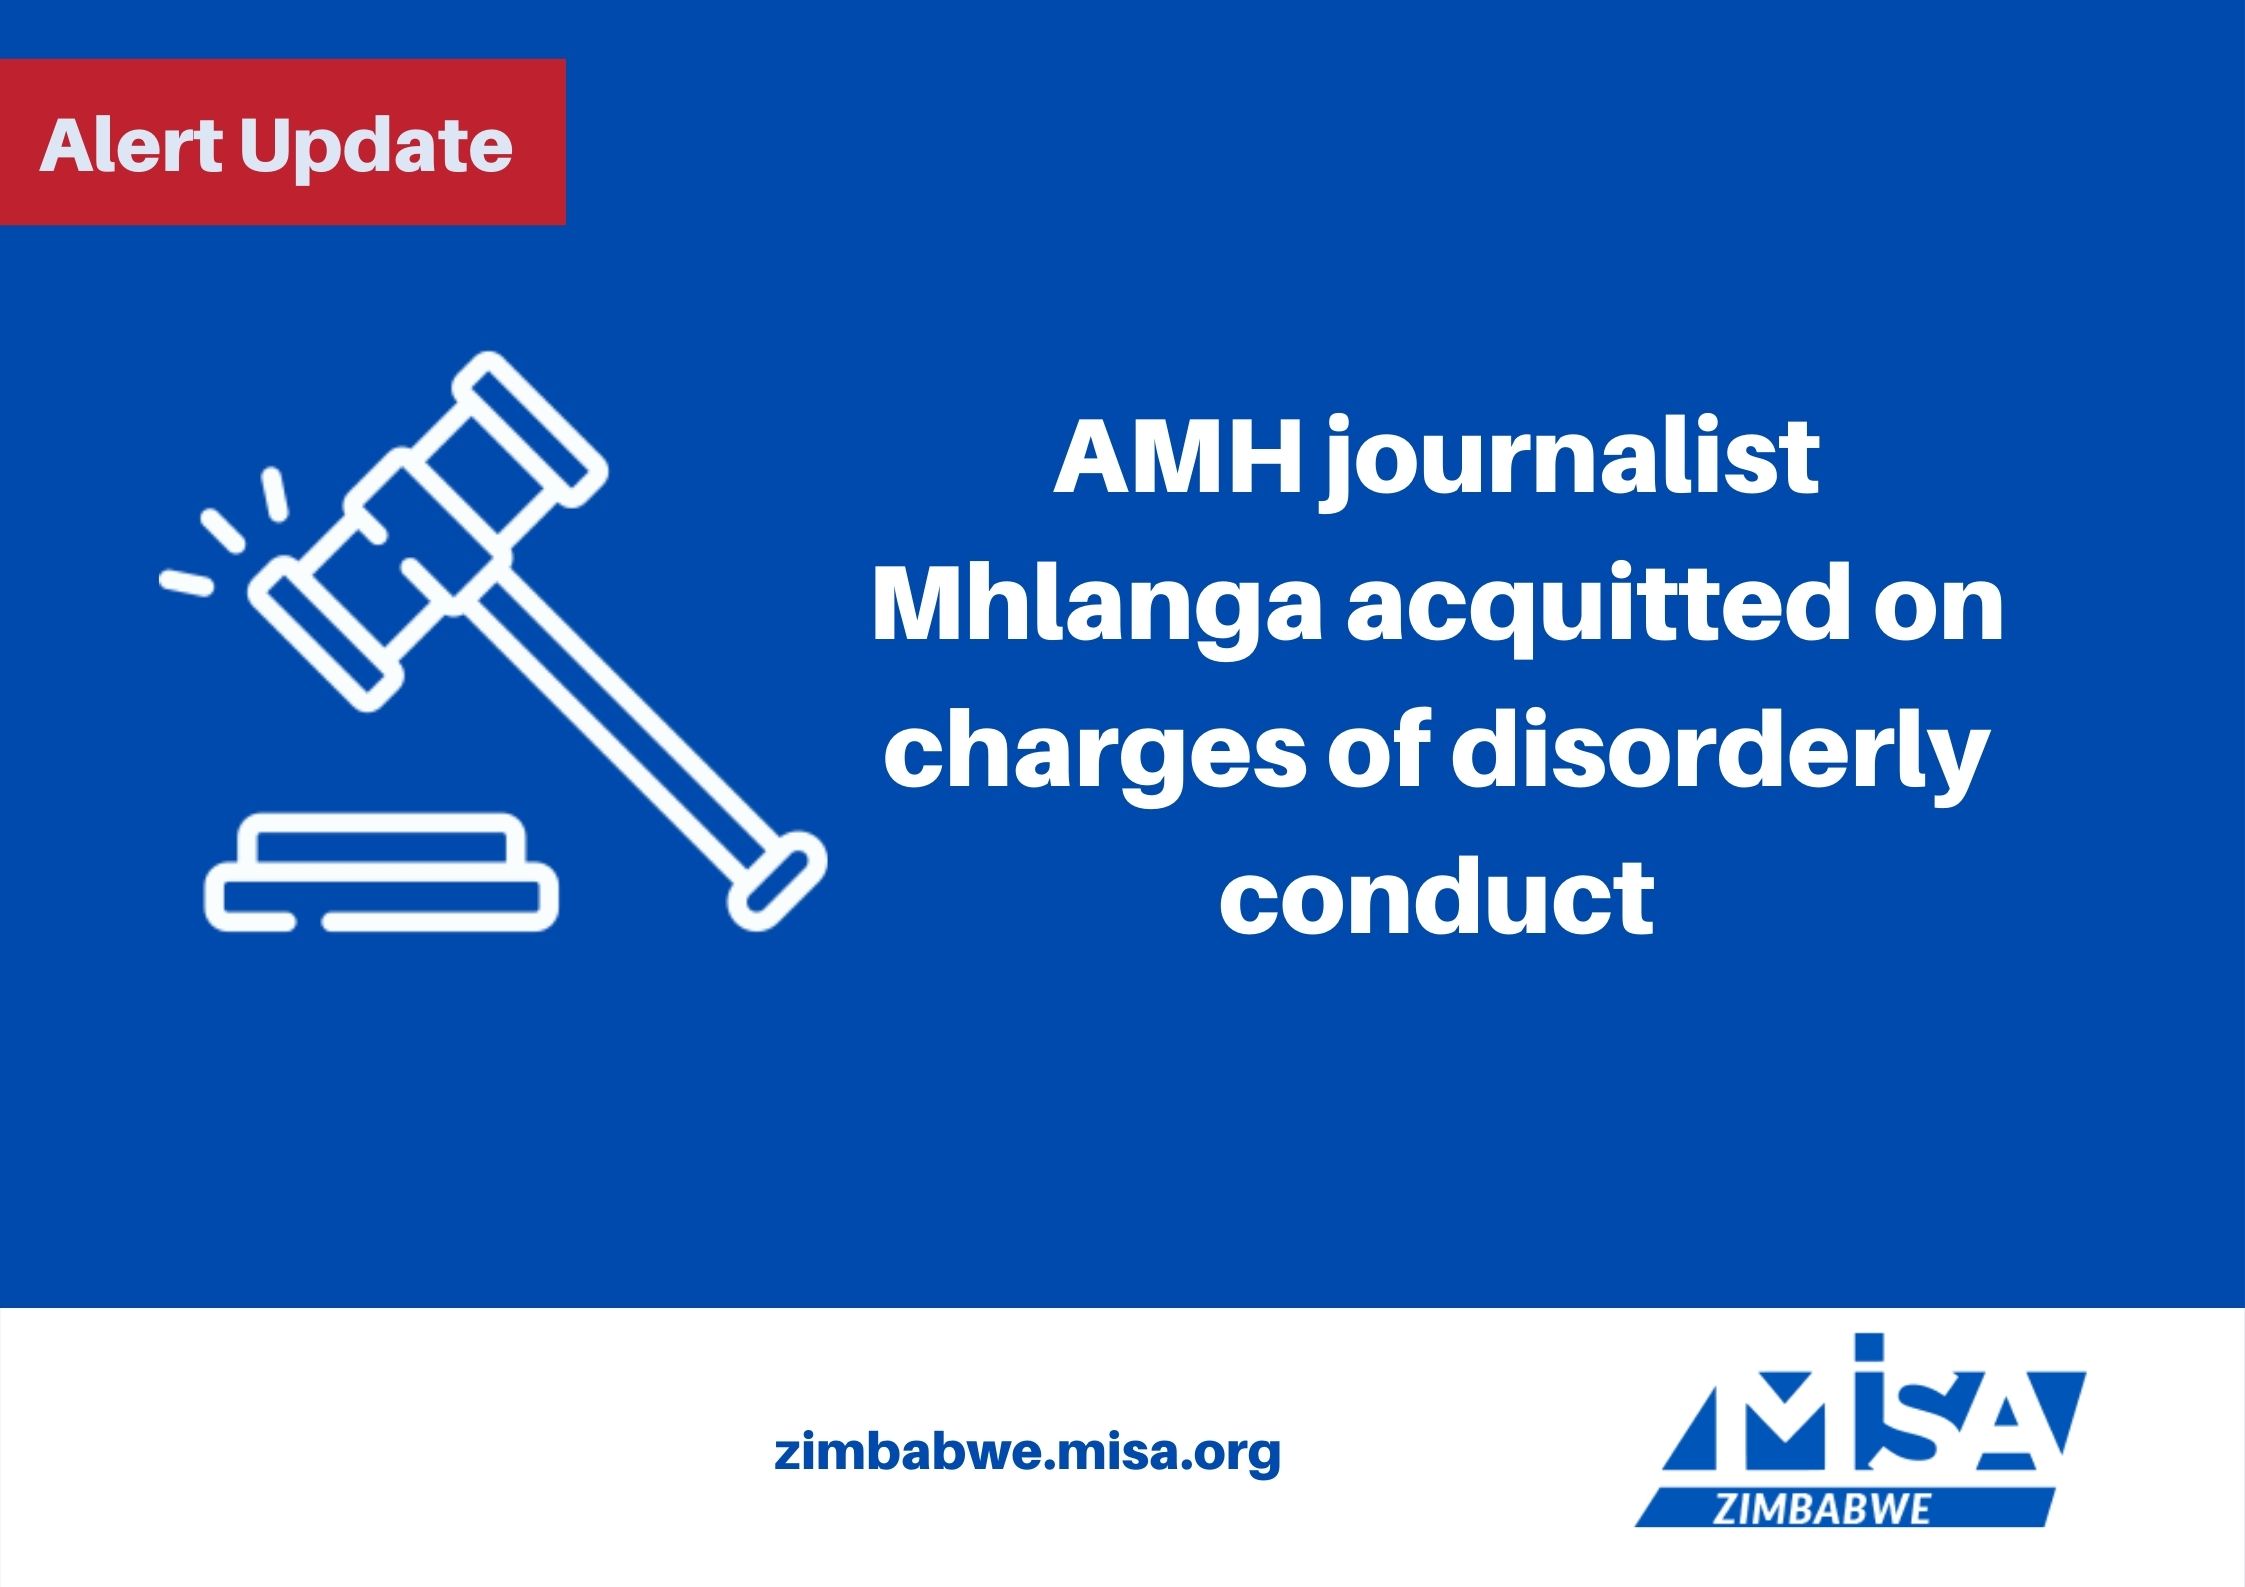 AMH journalist Mhlanga acquitted on charges of disorderly conduct